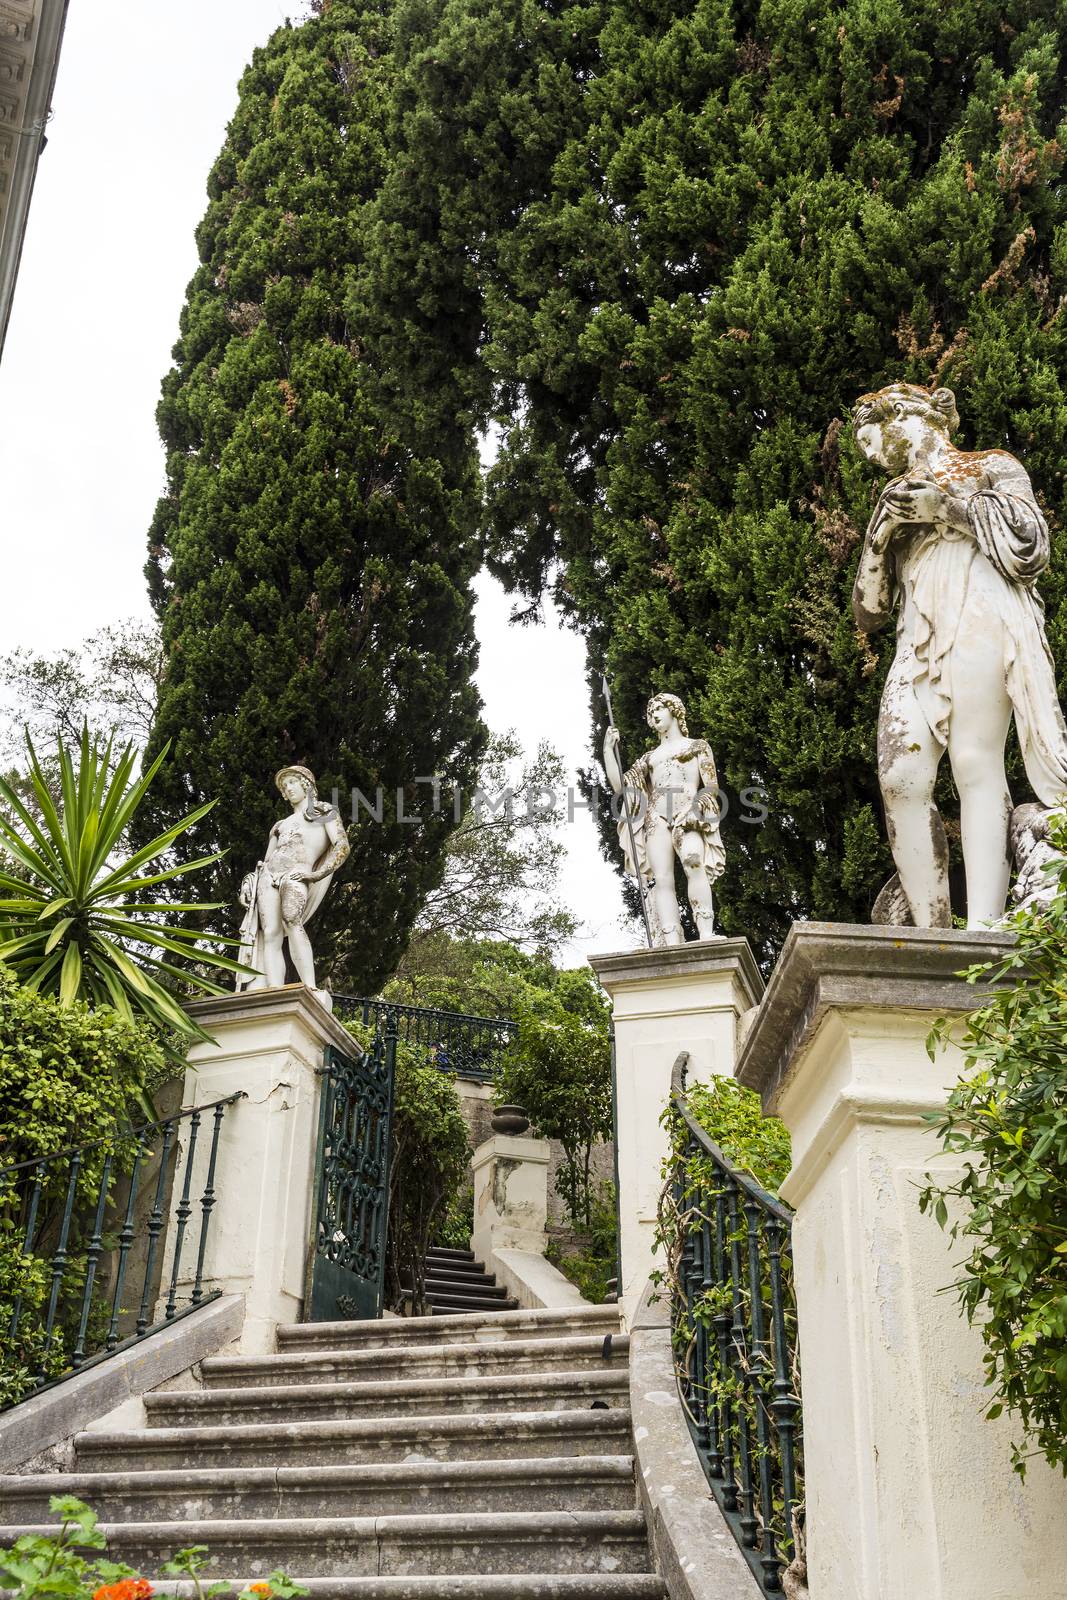 Achilleion palace, Corfu, Greece - August 24, 2018: Classical statues at the Achillion Palace on the island of Corfu.